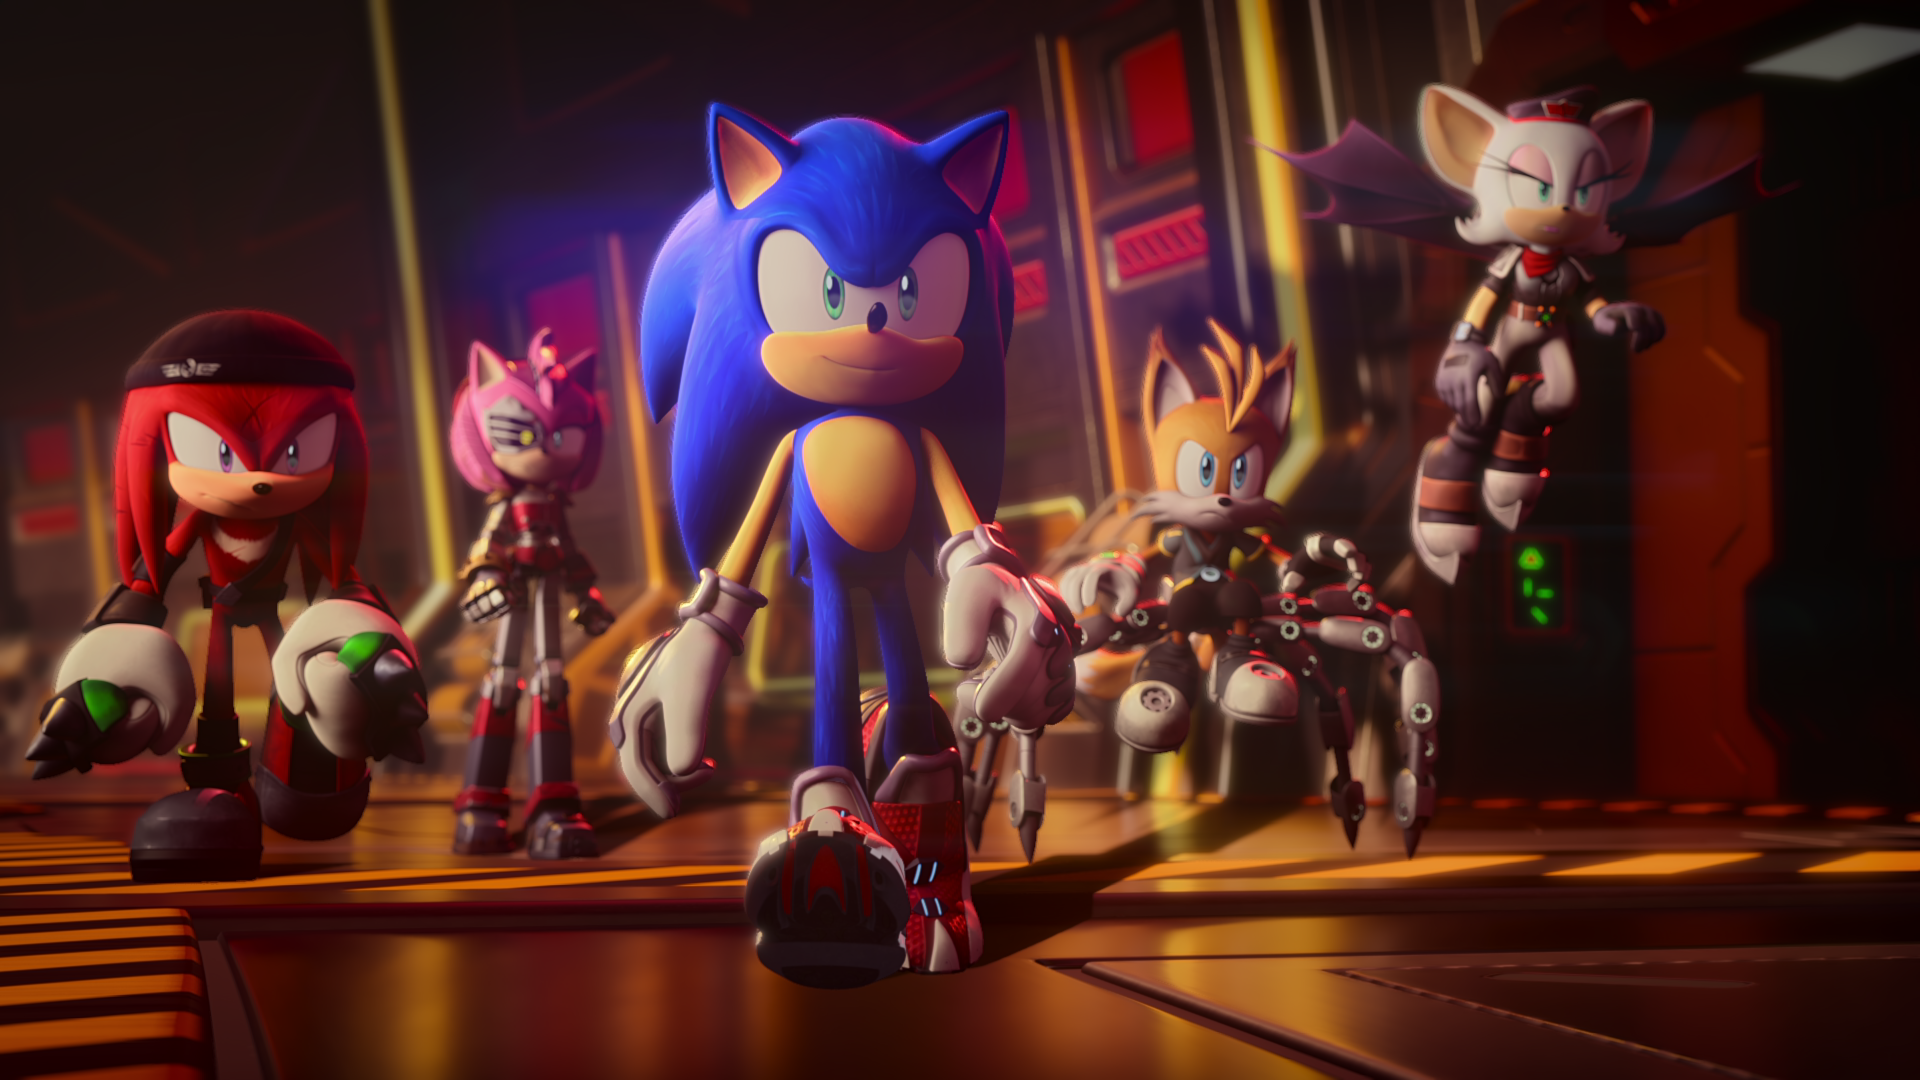 Sonic Prime teaser trailer further confirms winter 2022 release window